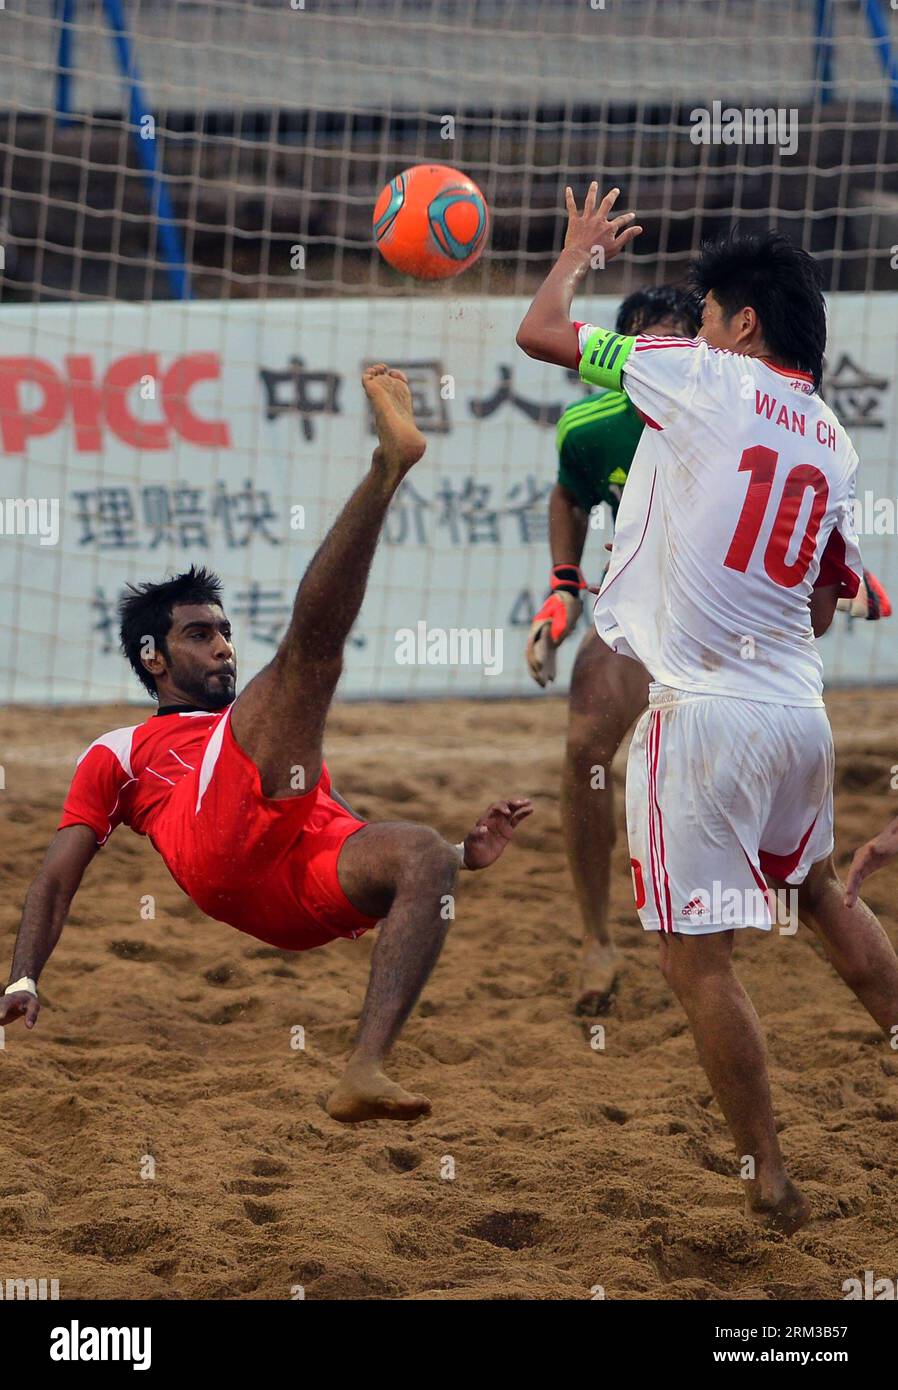 Bildnummer: 60123015  Datum: 14.07.2013  Copyright: imago/Xinhua (130714) -- HAIYANG, July 14, 2013 (Xinhua) -- Kamal Ali Sulaiman (L) of the United Arab Emirates shoots during the final between the United Arab Emirates and China at the 2013 Asian Beach Soccer Cup held in Haiyang, a coastal city of east China s Shandong province, July 14, 2013. The United Arab Emirates lost 3-4. (Xinhua/Zhu Zheng) (SP)CHINA-HAIYANG-ASIAN BEACH SOCCER CUP-FINAL (CN) PUBLICATIONxNOTxINxCHN Nationalteam Vereinigte Arabische Emirate Länderspiel x0x xsk 2013 hoch      60123015 Date 14 07 2013 Copyright Imago XINHUA Stock Photo